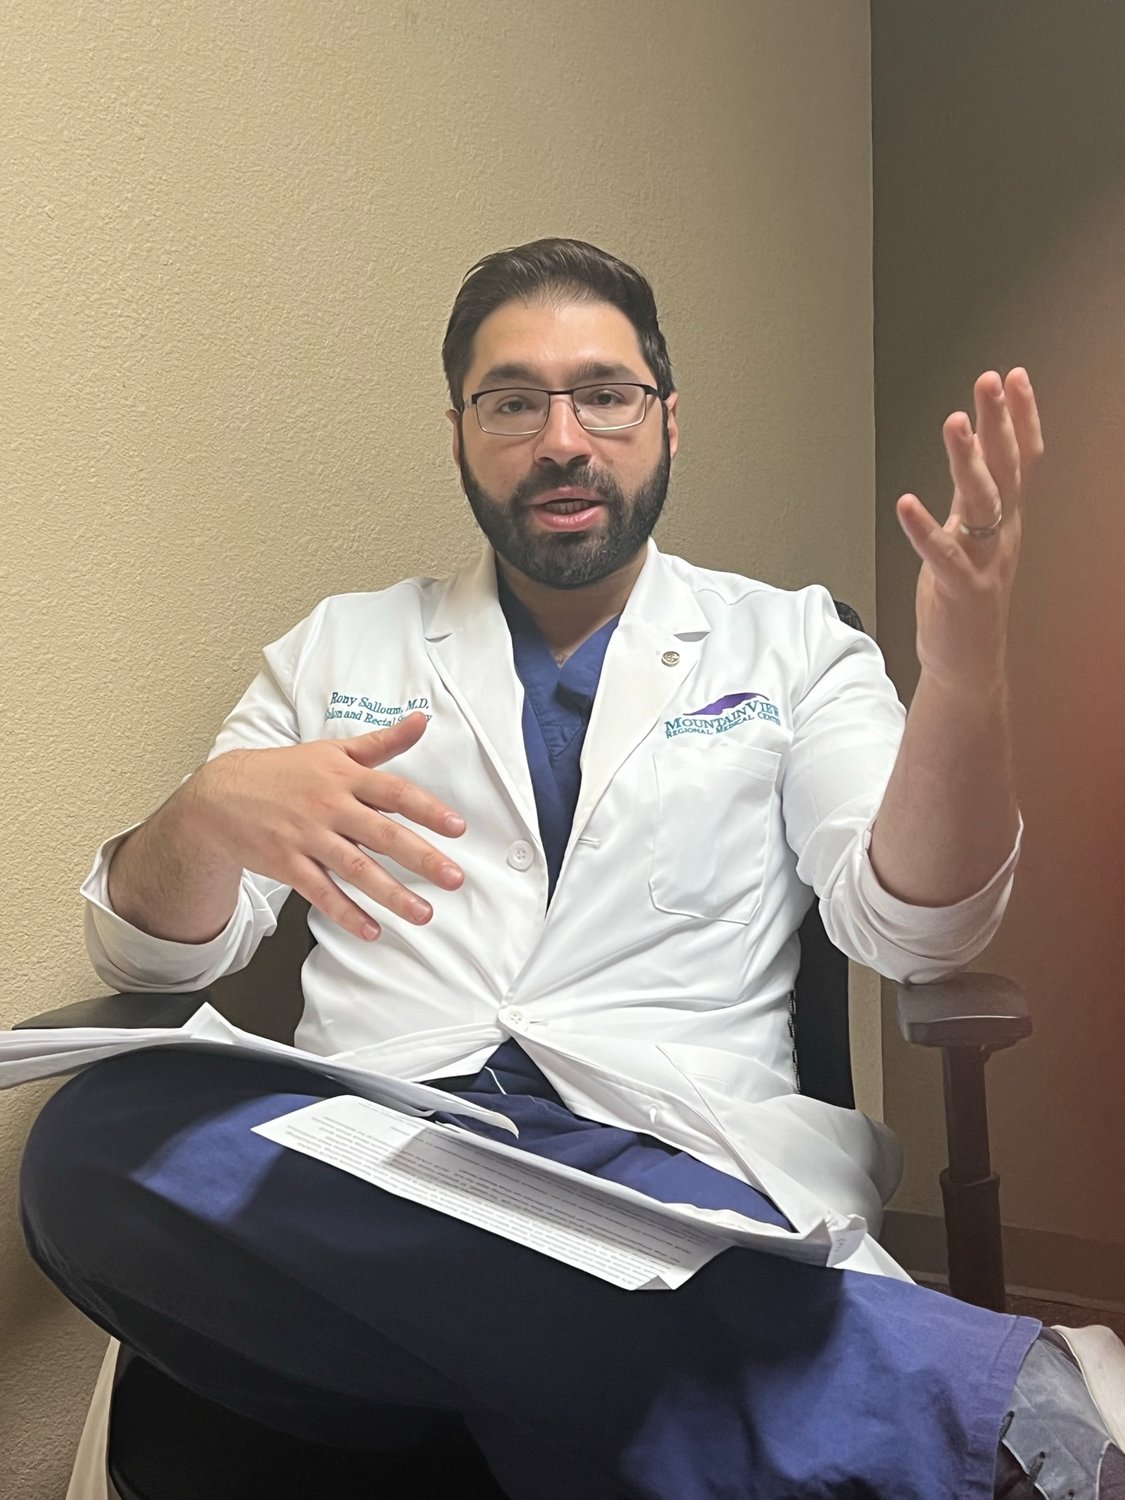 Dr. Rony Salloum, a colorectal surgery specialist in Las Cruces, believes the fourth most common cancer in America, colon cancer, can be treated successfully if detected early. New Mexicans, though improving, do not generally do a good job staying up to date with colon screenings.